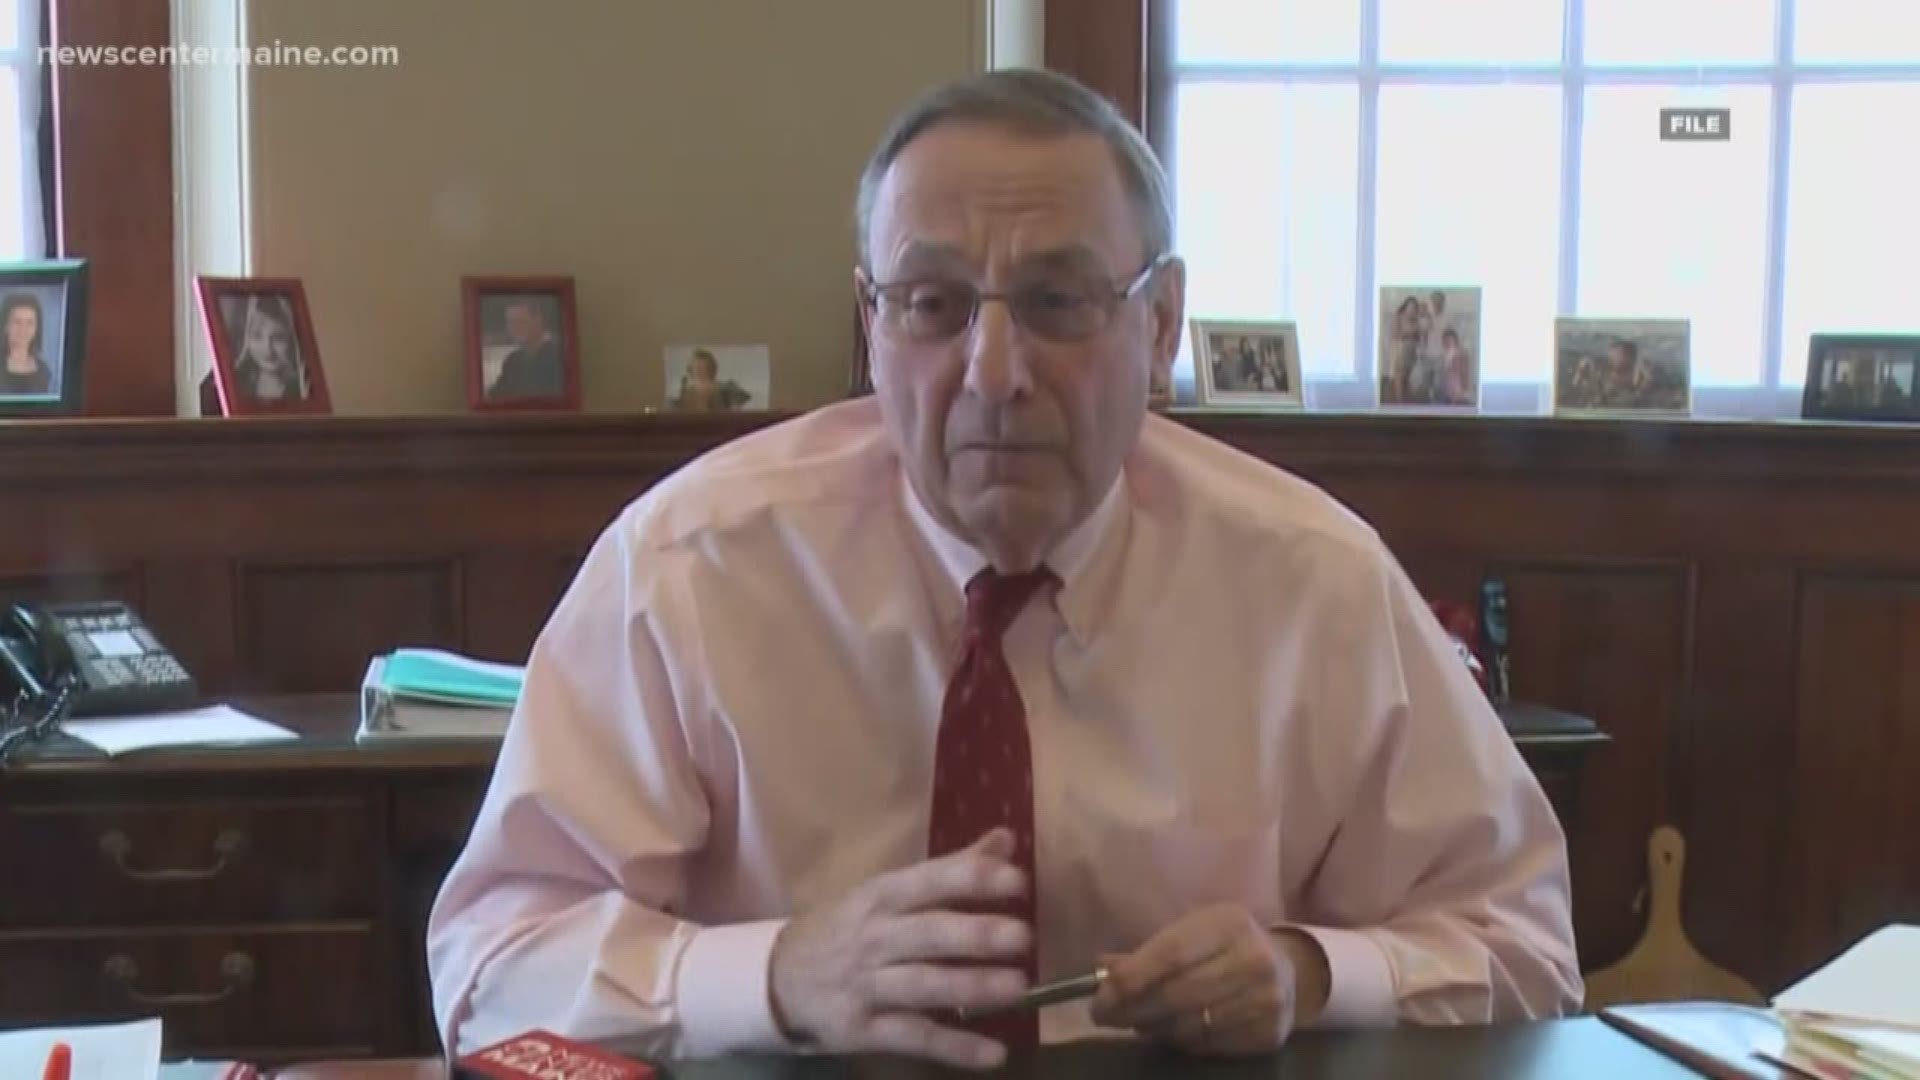 LePage said Monday he was not aware that his administration spent more than $1,100 a night during a stay at a hotel owned by the Trump family.